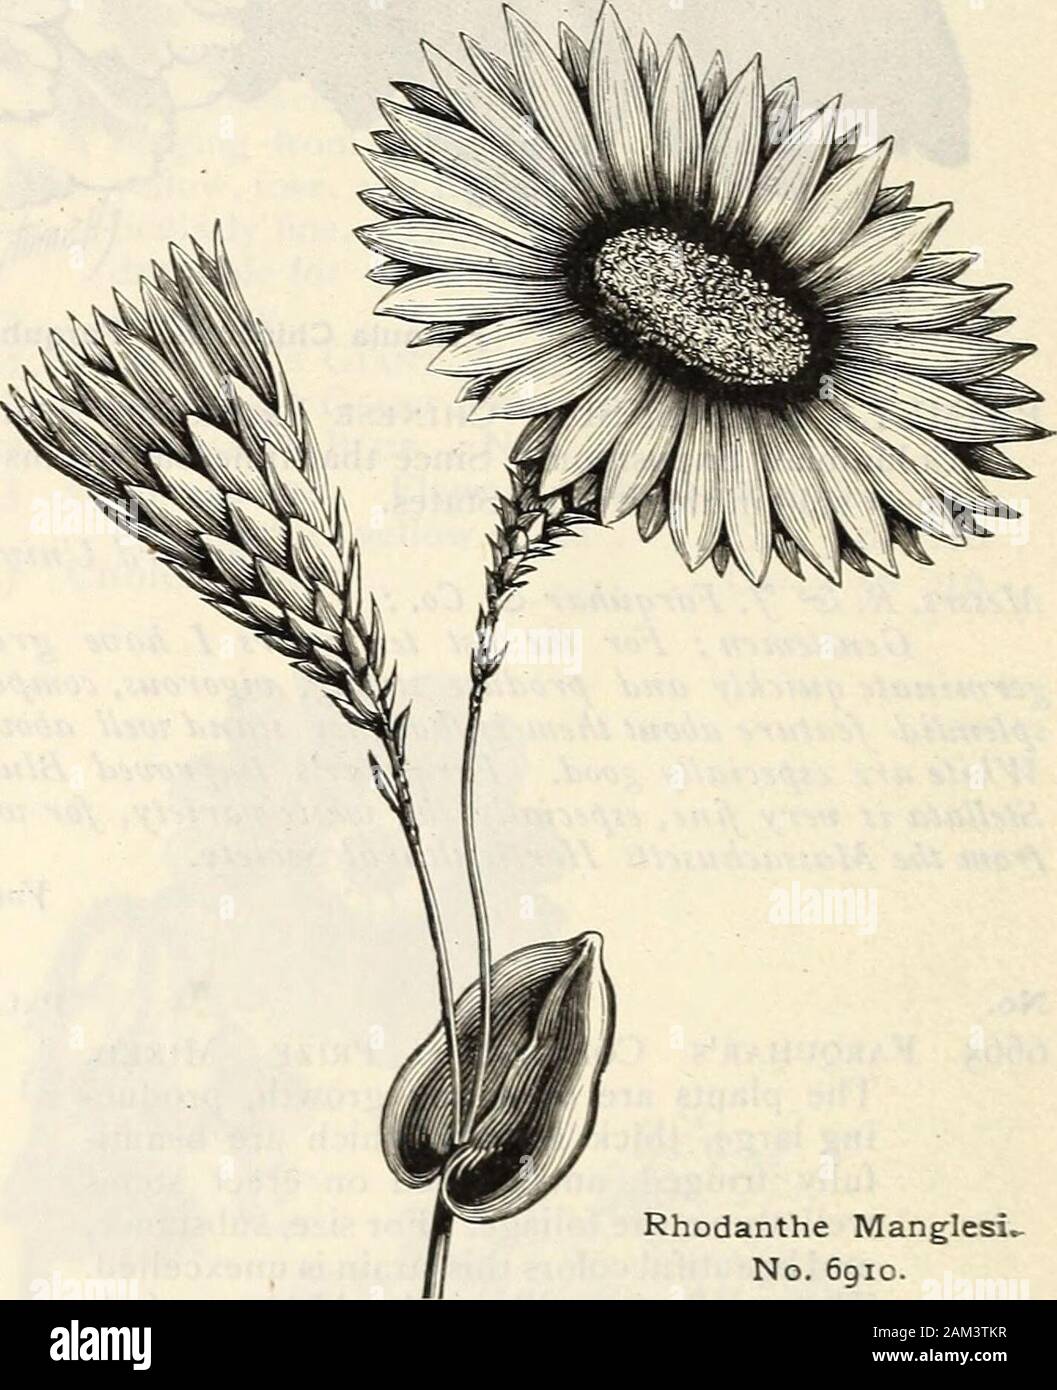 Farquhar's catalogue : spring 1904 . Pyrethrum Roseum, Single Hybrids. No. 6890.. 6900 69056910 6915 Rhodanthe Manglesi-No. 6gio. Half-hardy annuals withEverlasting flowers. They are beautiful forthe open garden, or grown in pots for theconservatory. If required for winter use asdried flowers, they should be cut beforethey are fully expanded; I ft., July-Oct.MACULATA. Bright pink with crimson circle, Oz., .75 — alba. Pure white, very beautiful. -s .75Manglesi. Brilliant rose . l .75 — flore pleno. Beautiful rose-coloredflowers, a large percentage of them double, % oz., 1.25 •OS•OS.05 .10 Mr. F Stock Photo